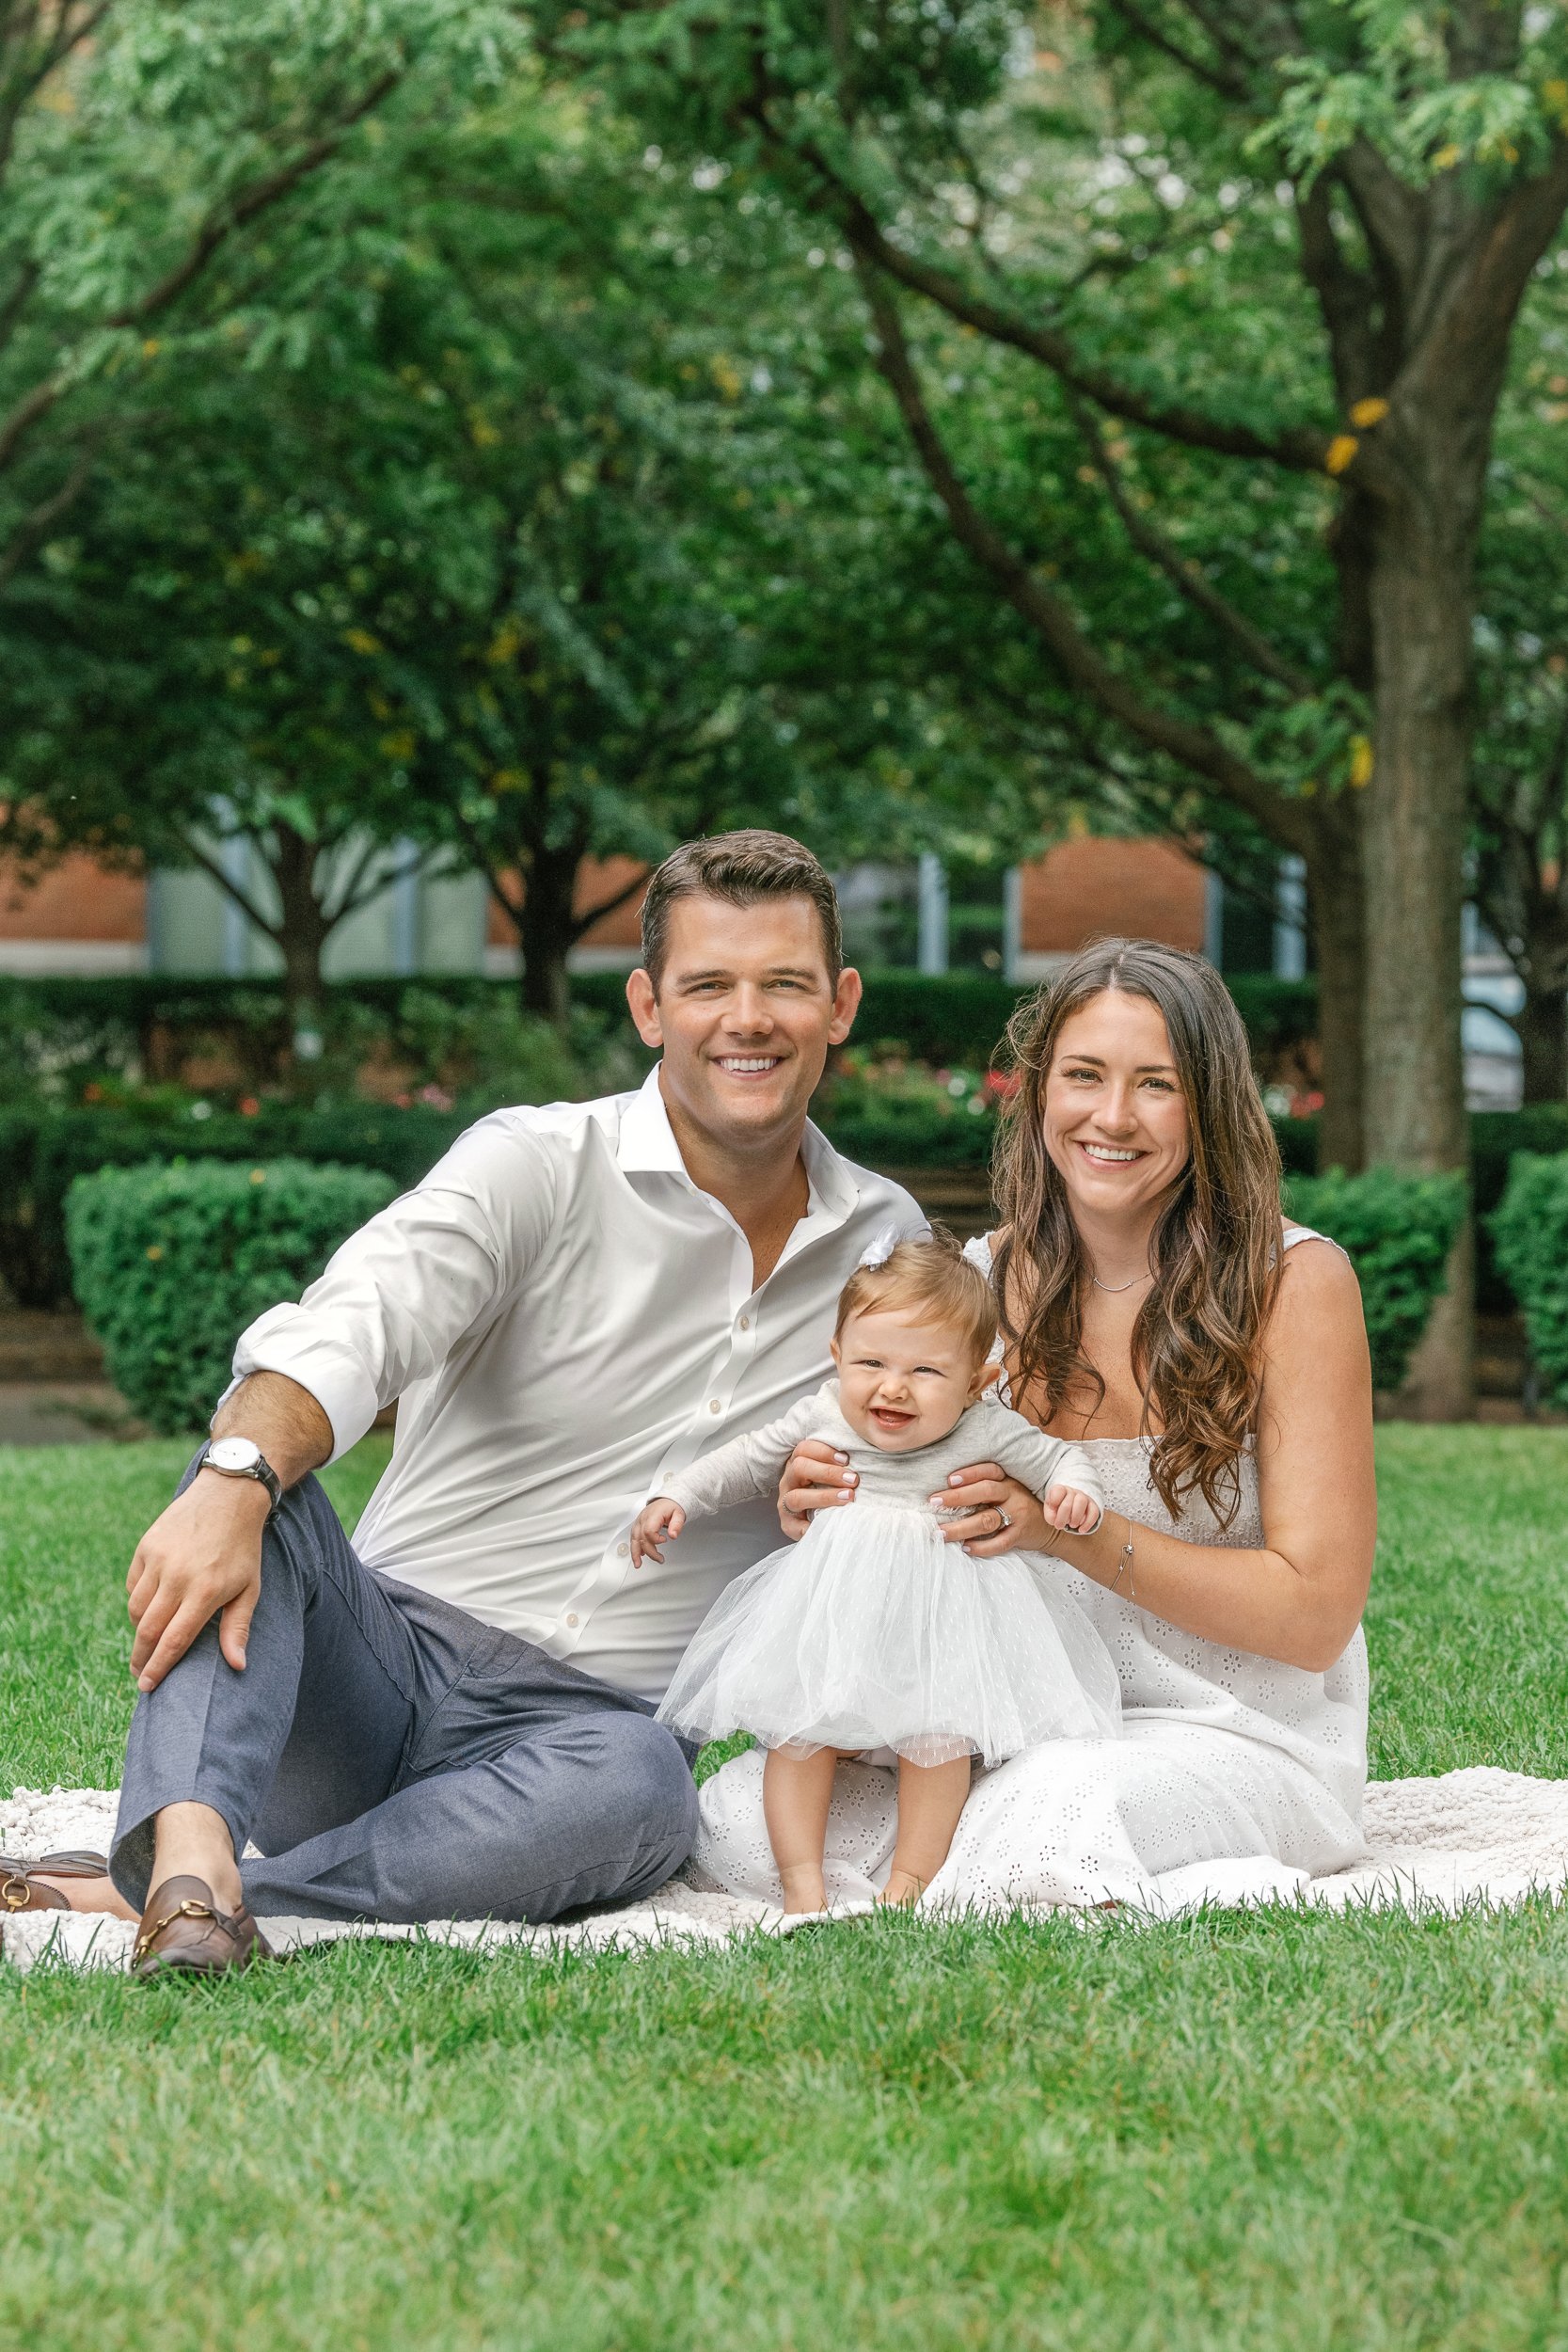  At a Hoboken park, a family with a baby sits on a picnic blanket captured by Nicole Hawkins Photography. family pictures with a baby girl #nicolehawkinsphotography #newjerseyphotographers #familyphotographer #6monthportraits #NJfamilyphotos 